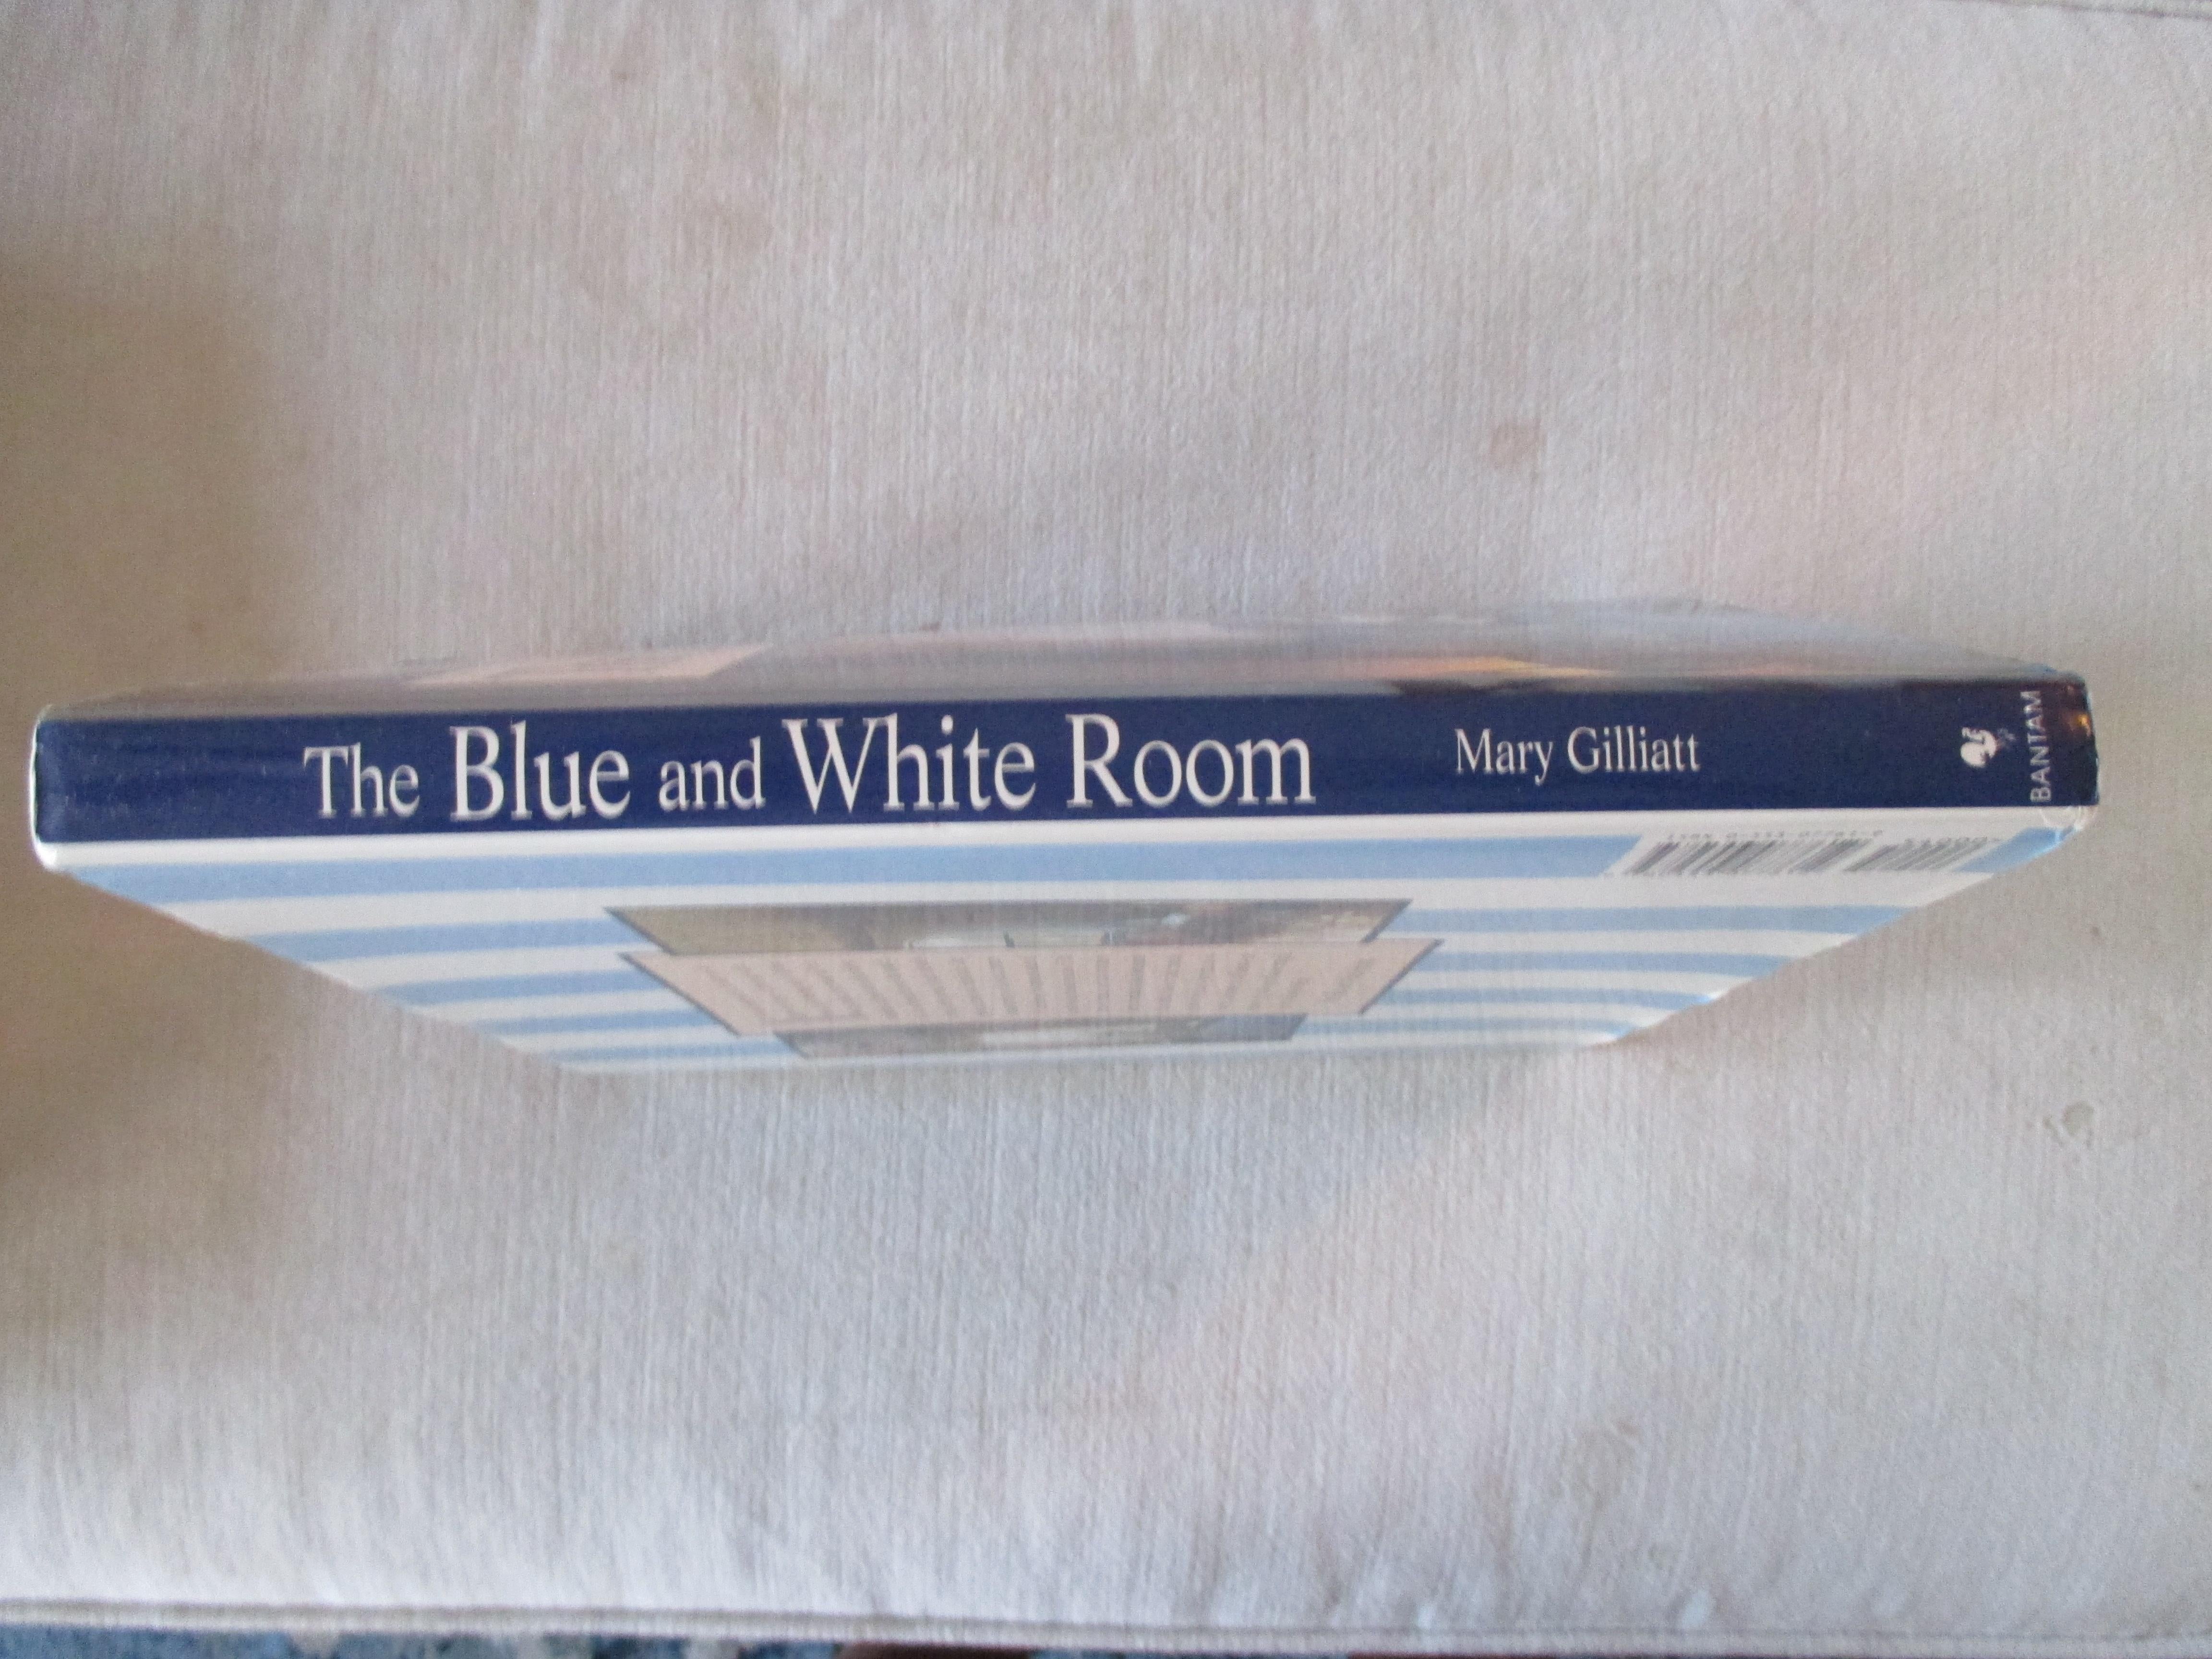 North American The Blue and White Room Hardcover Book